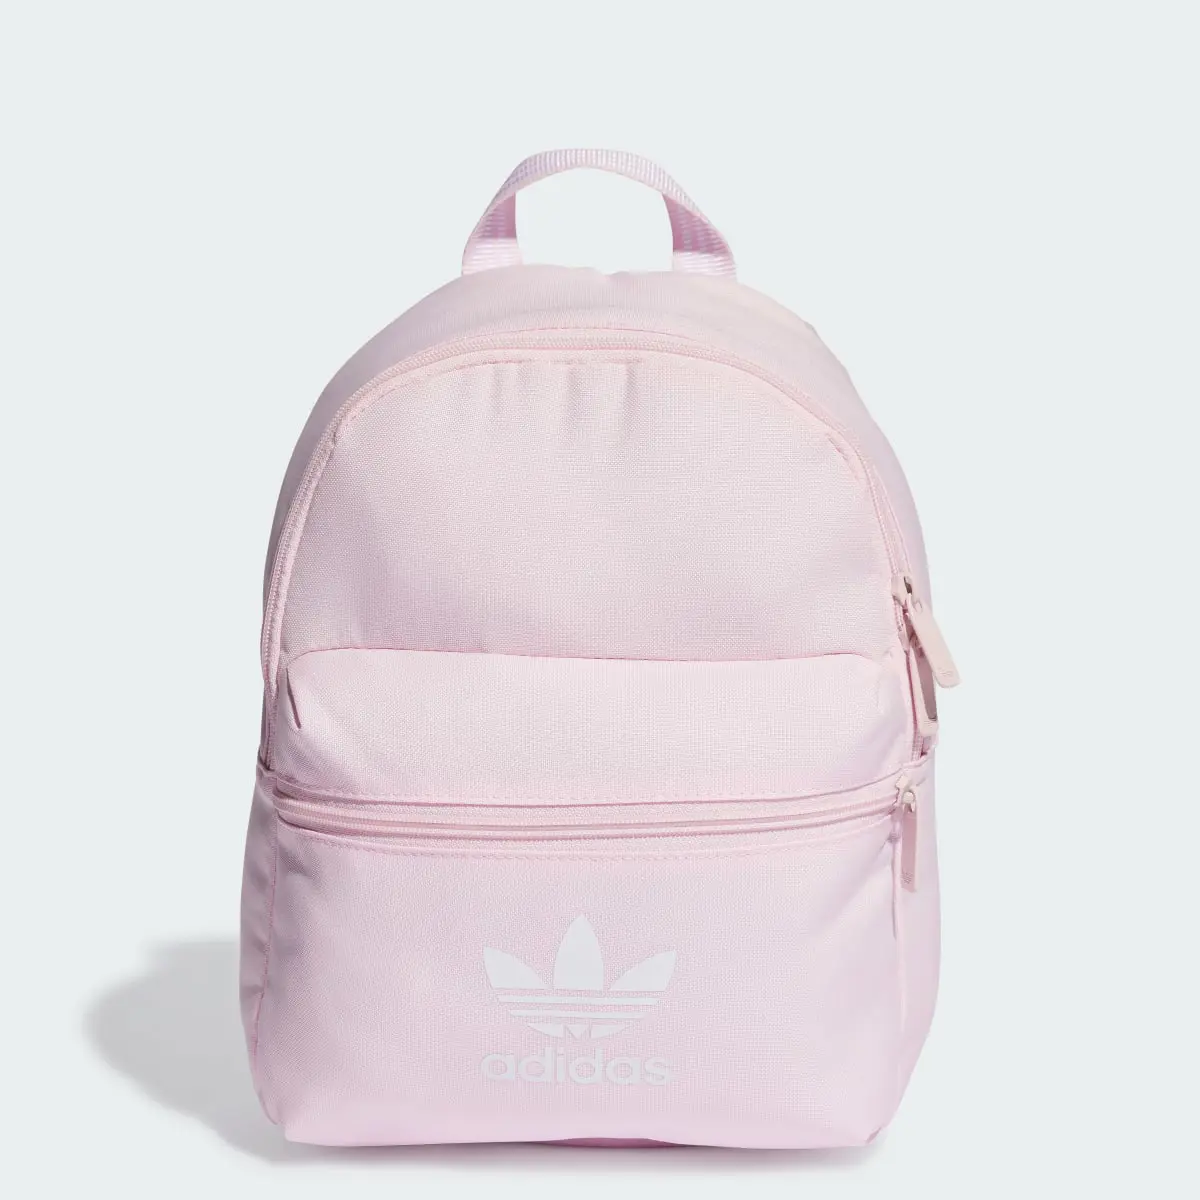 Adidas Small Adicolor Classic Backpack. 1